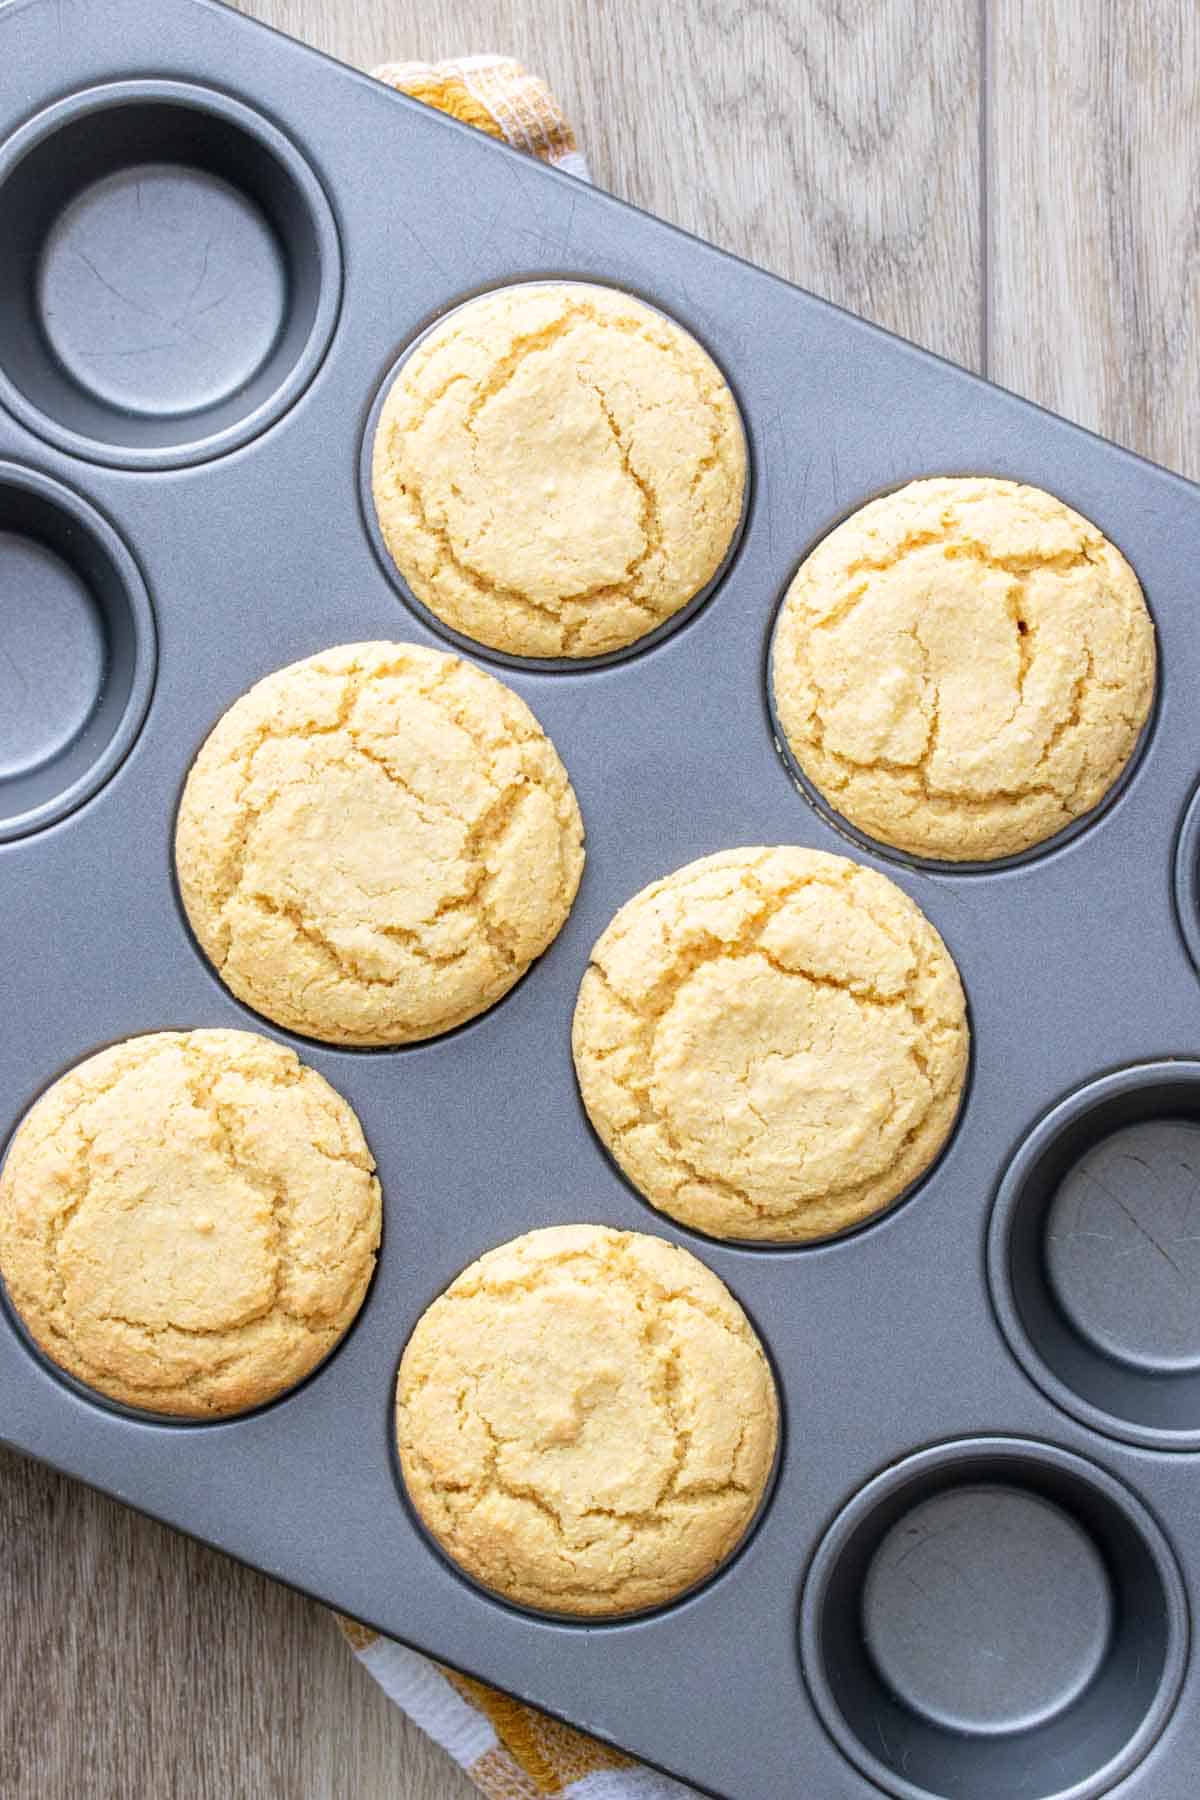 Baked yellow muffins in a muffin tin sitting on a wooden surface